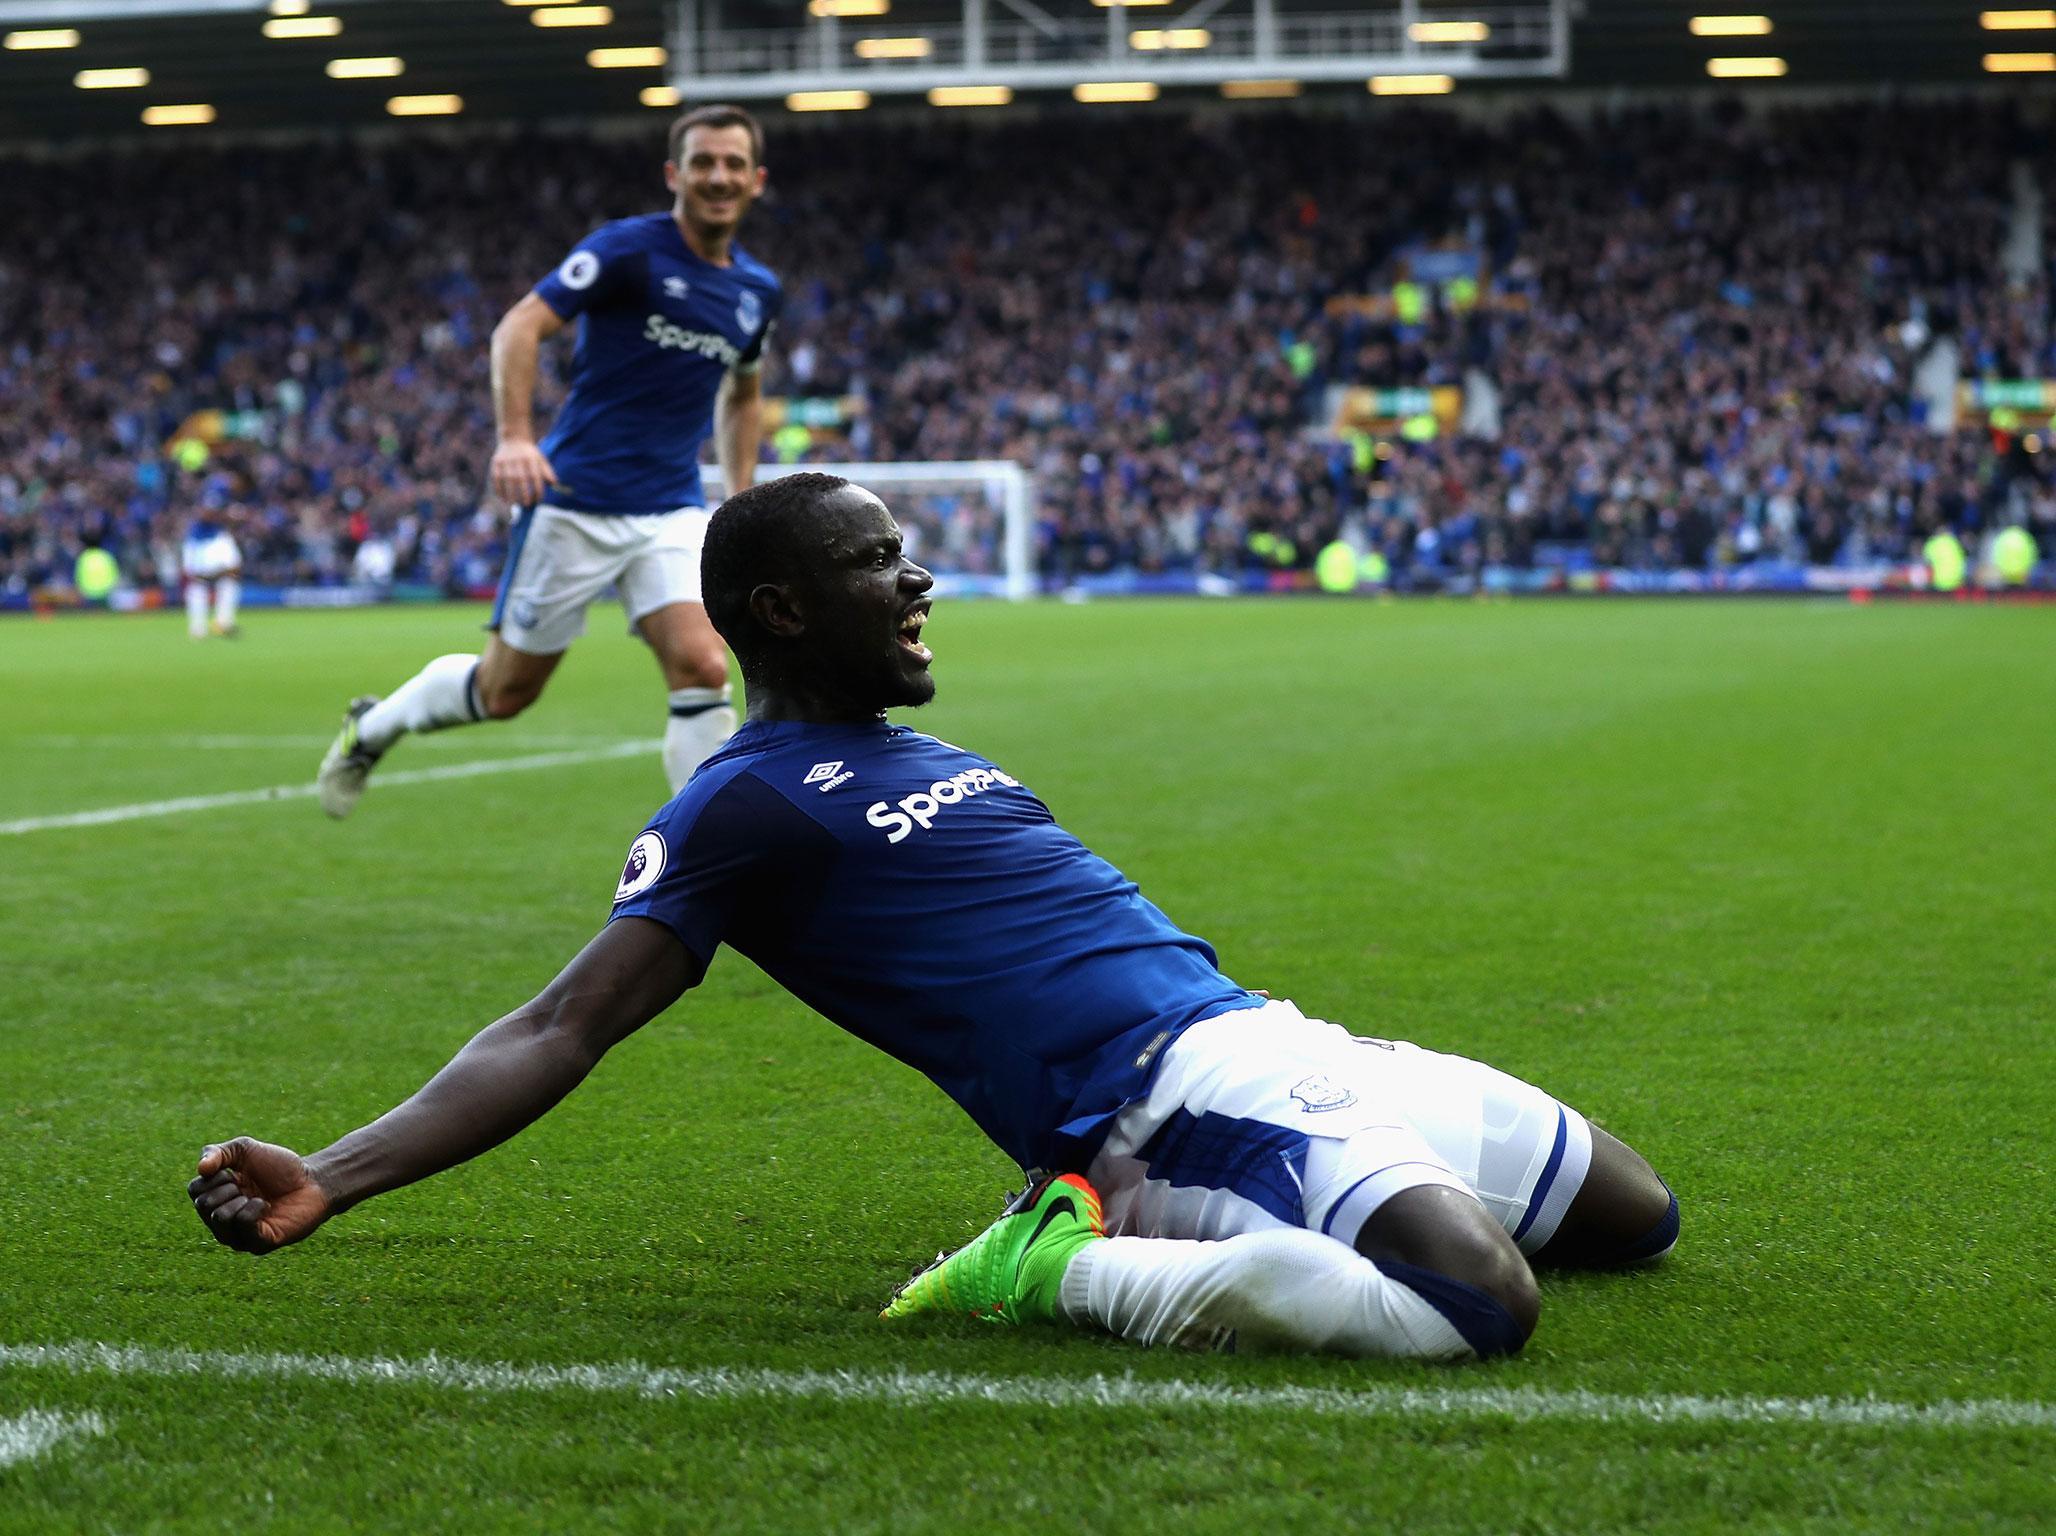 Oumar Niasse scored a late brace to win it for Everton